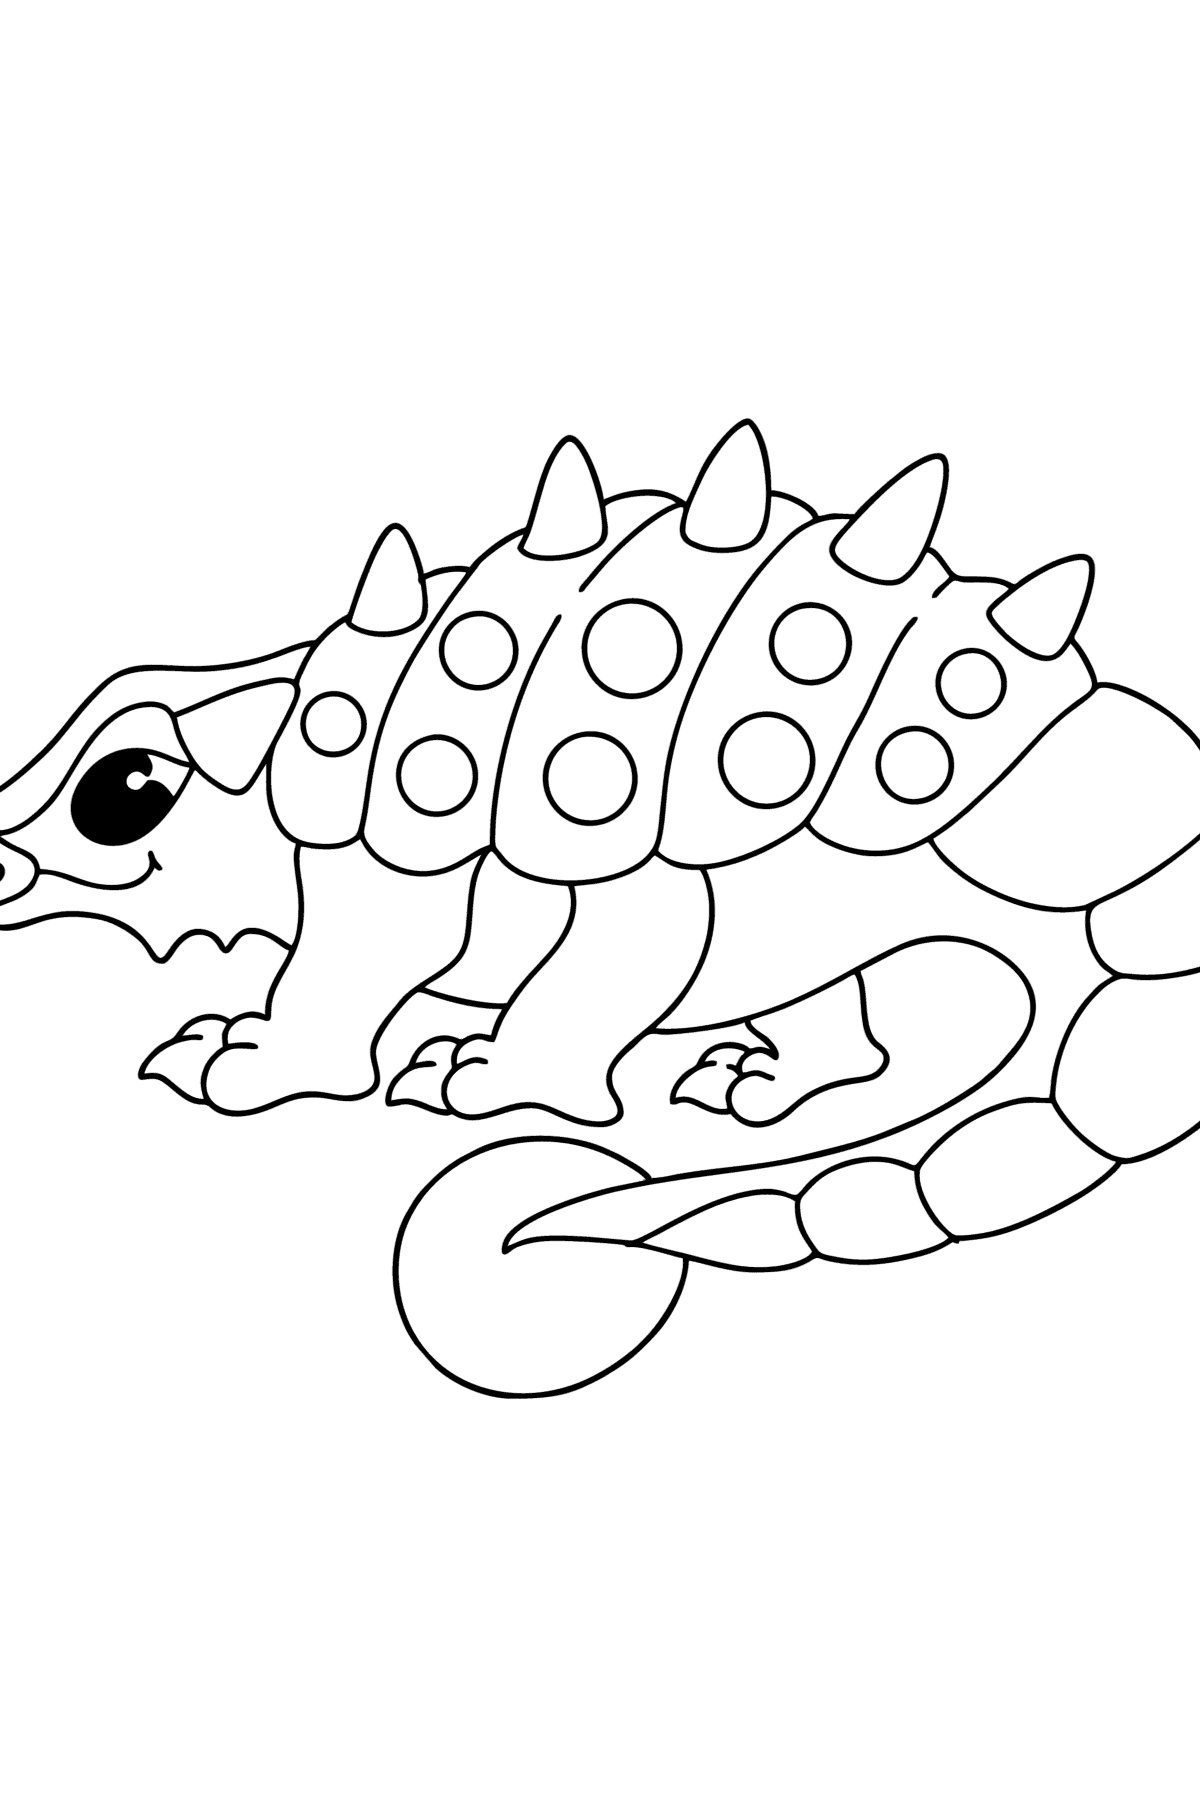 Ankylosaurus coloring page - Coloring Pages for Kids